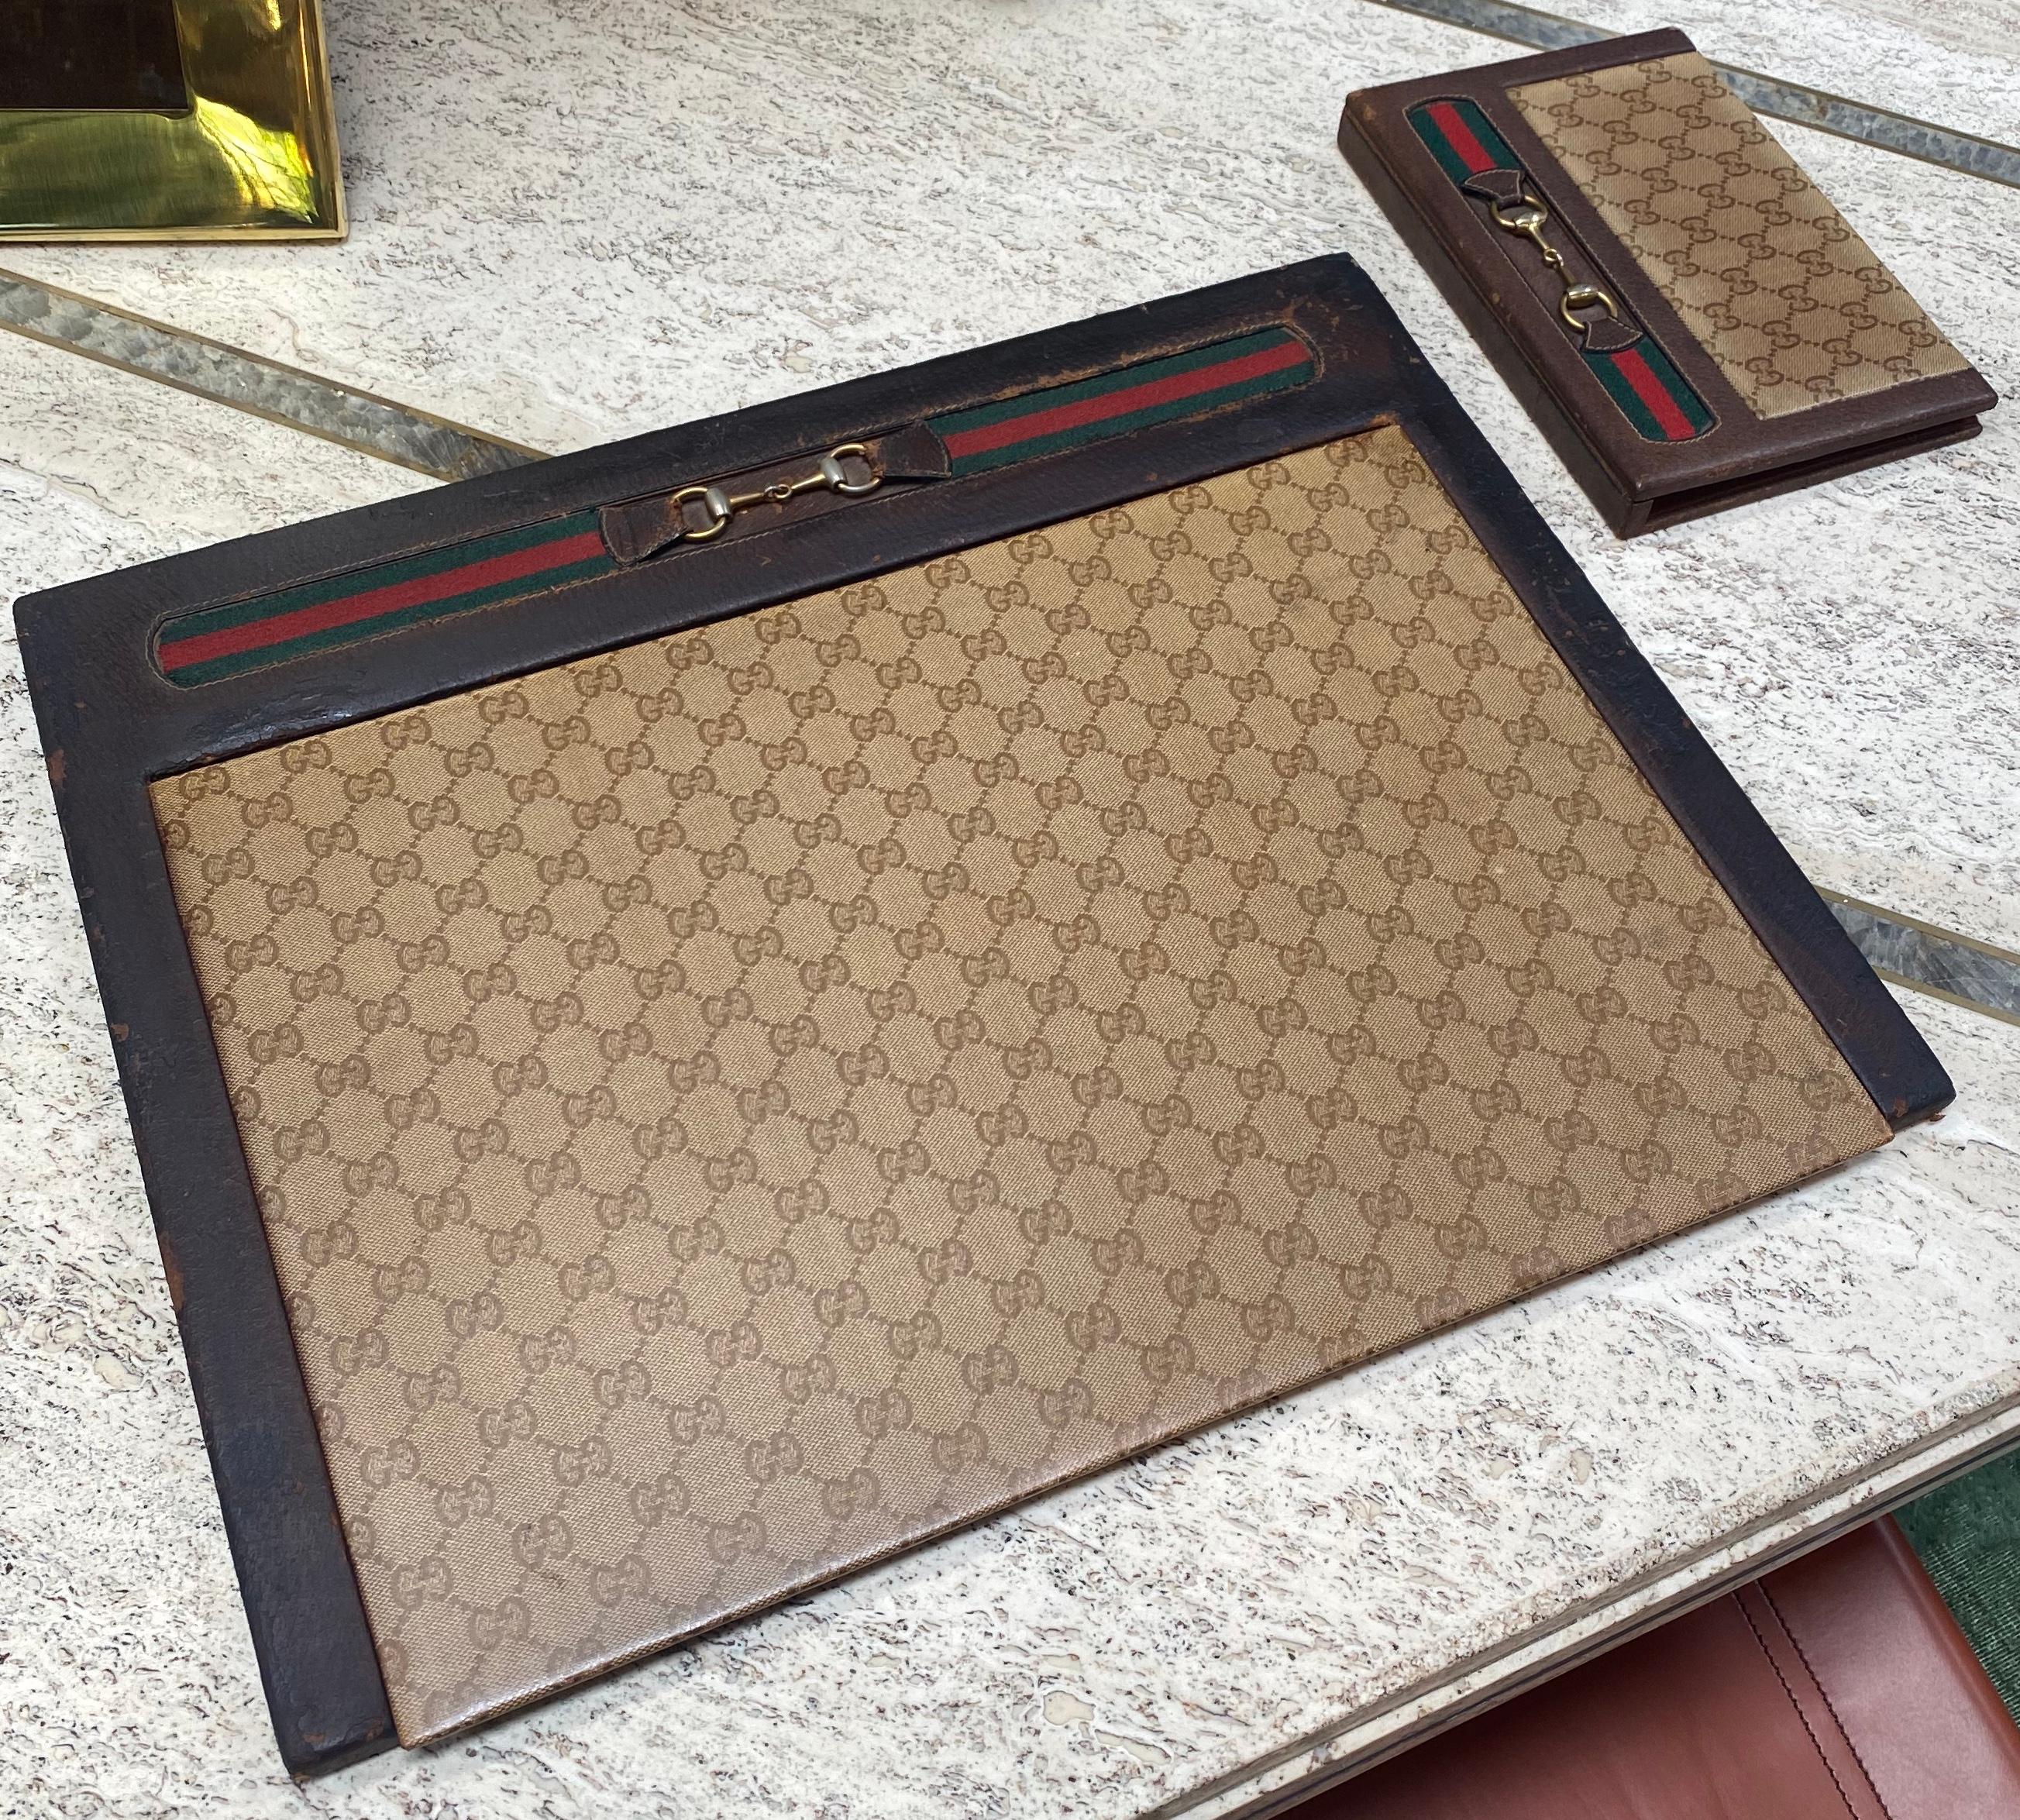 Set of 2 very rare Gucci desk accessories, the pad and the diary are both signed from GUCCI ITALIA.
Dimensions Below;

Pad : W21.5 D16 H1
Diary : W 6.5 D 9.5 H 1